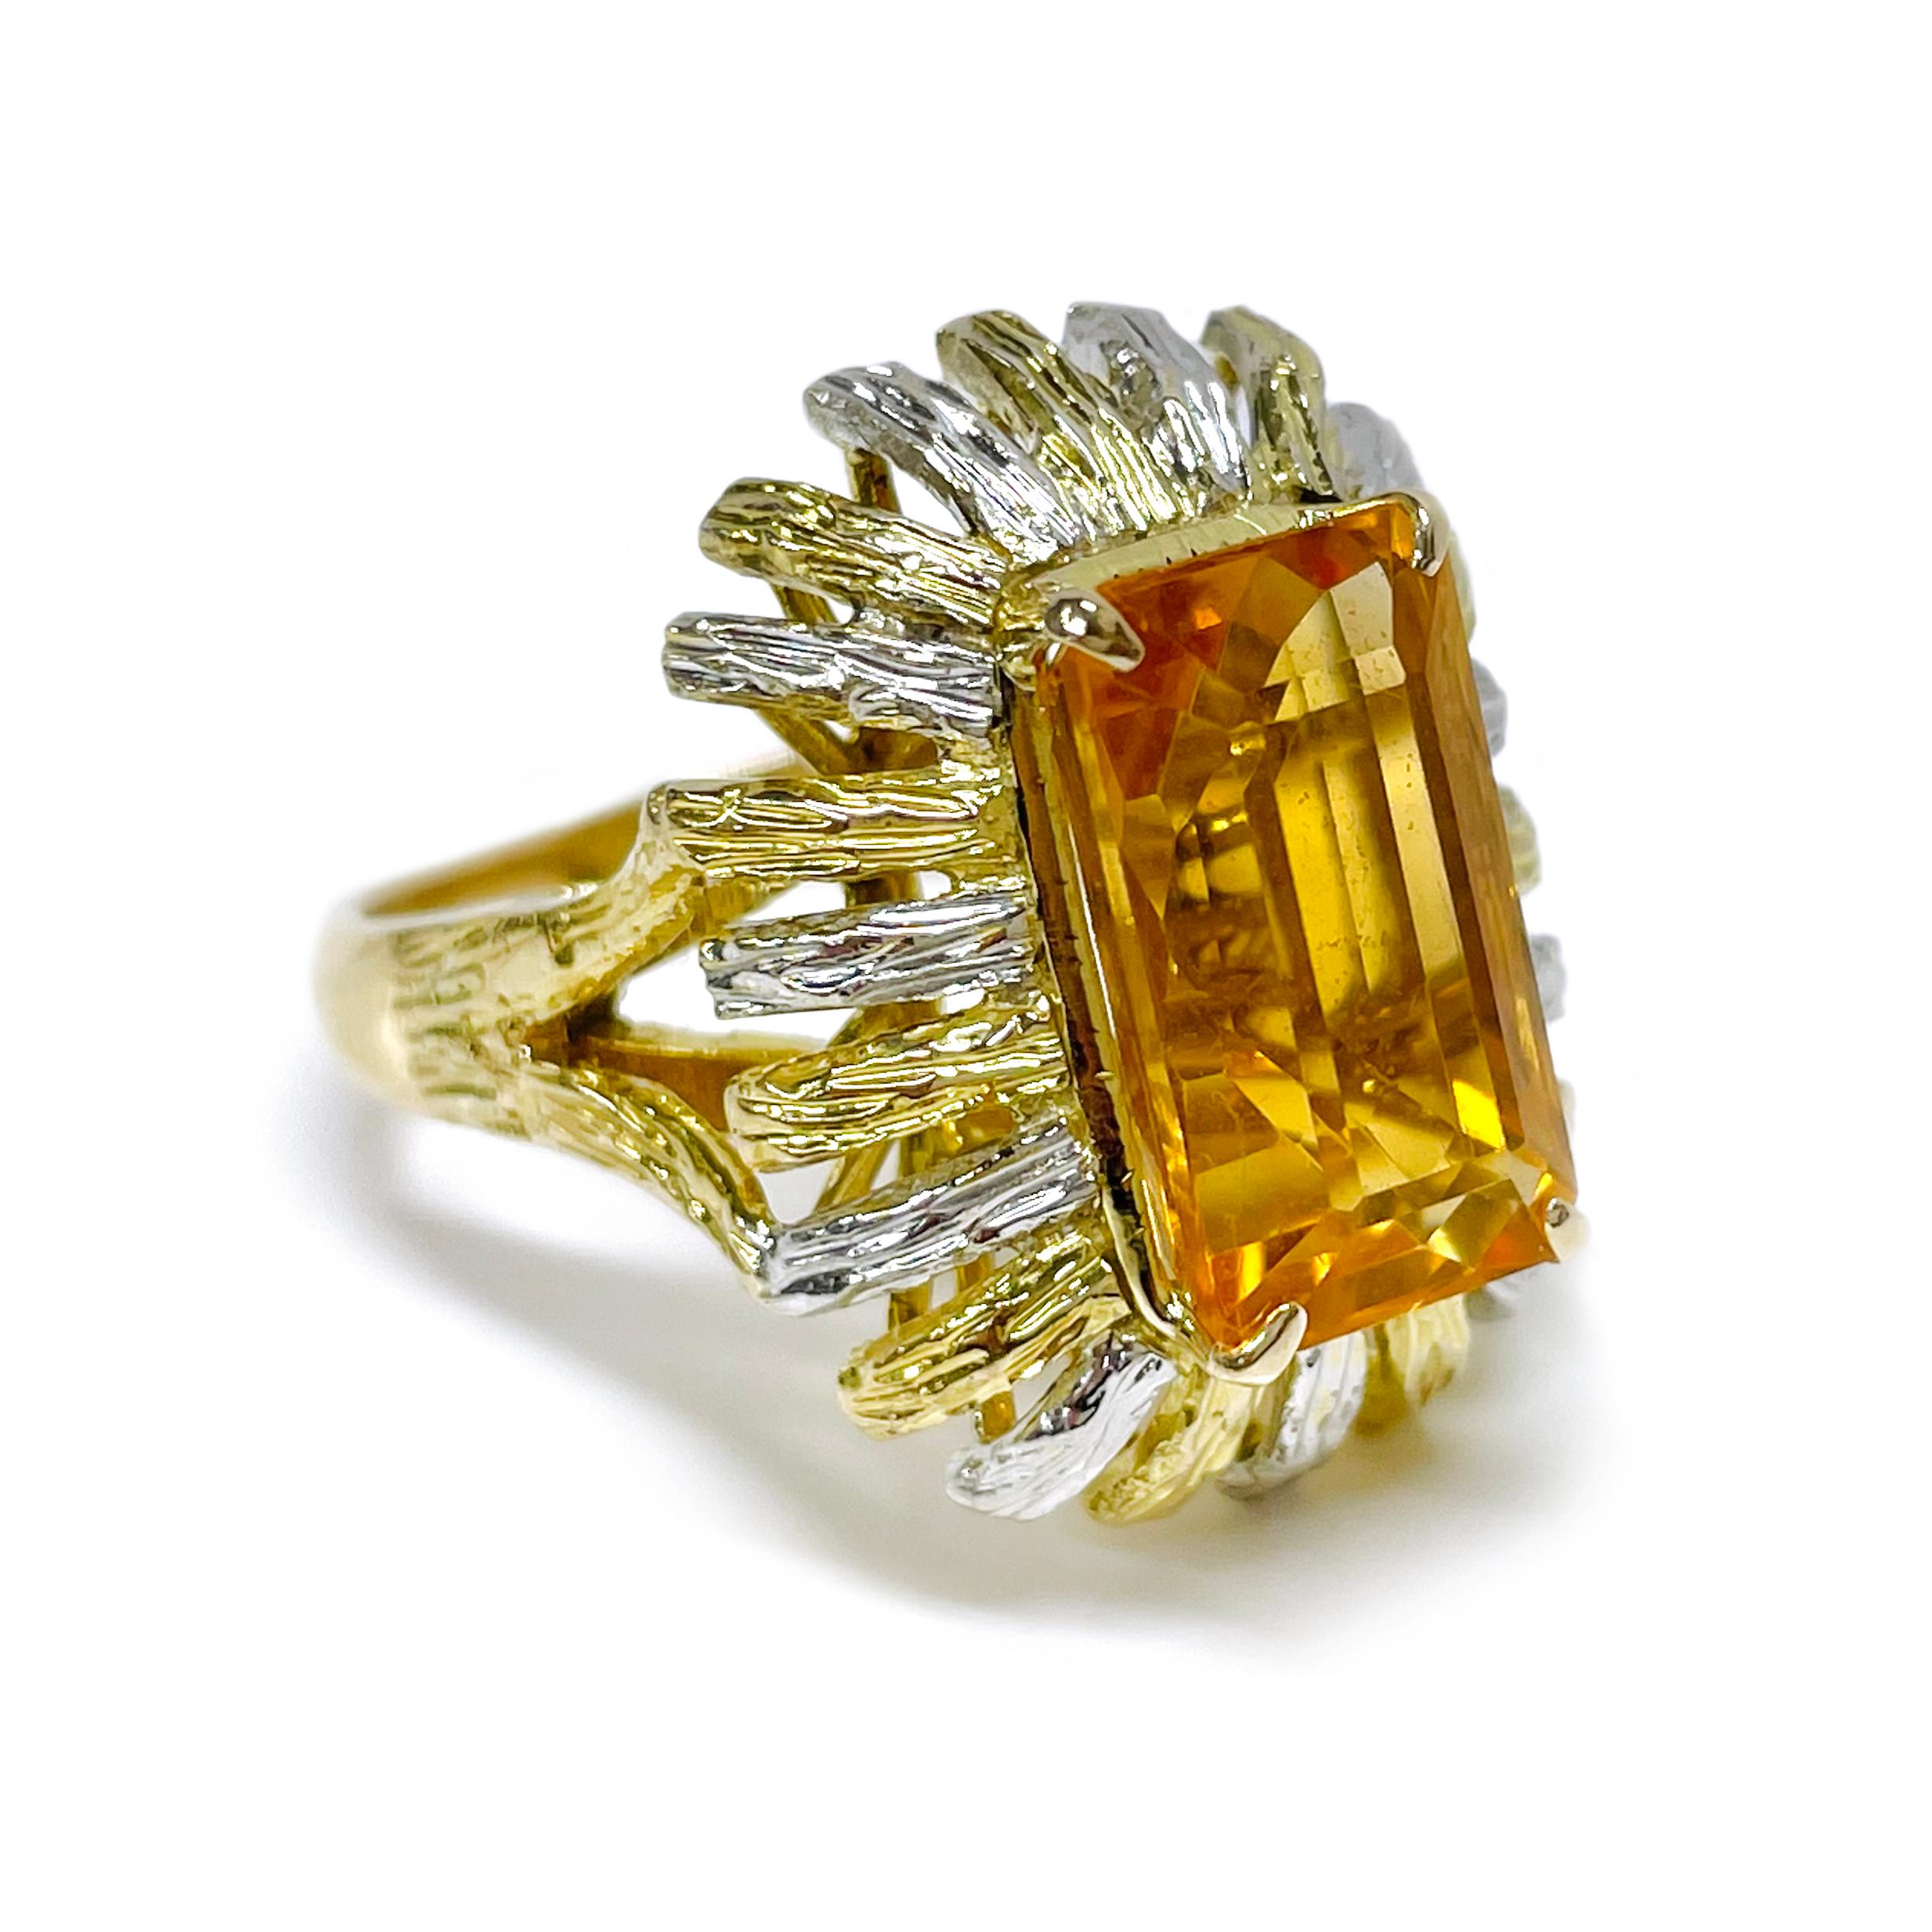 Platinum 18 Karat Yellow Gold Citrine Ring. The ring features a baguette-cut 13.3 x 7.7mm Citrine. The gemstone is four prong-set and the split band has a unique textured finish to about a quarter of the way down. That same texture is present on